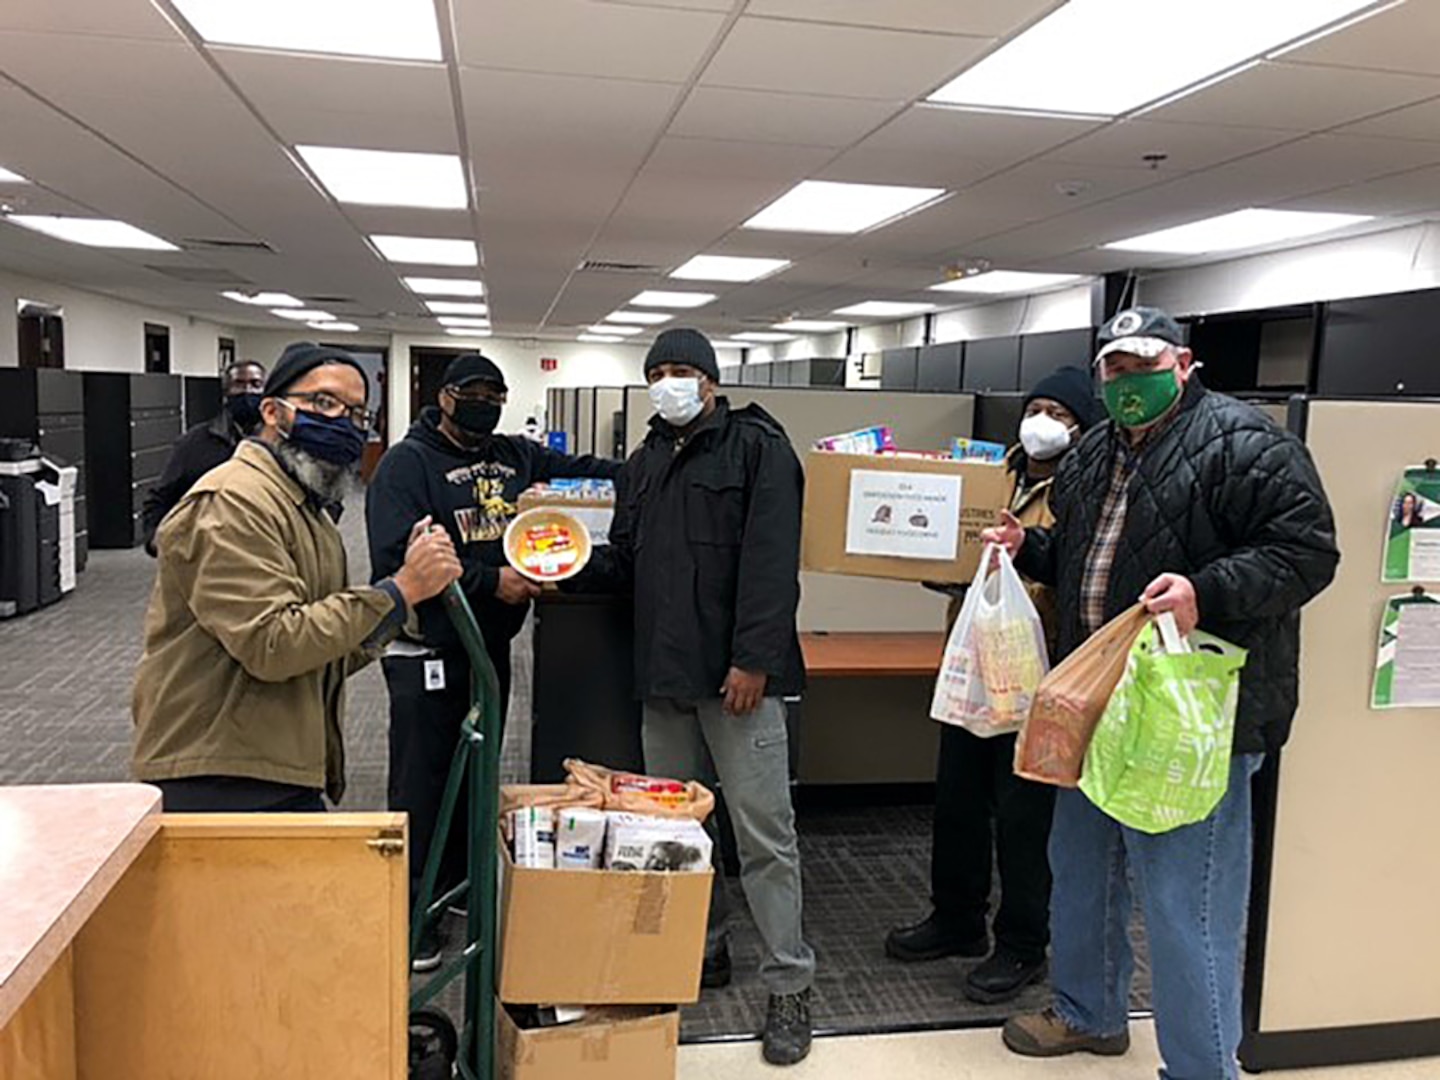 Masked men stand in an office space with boxes and bags of food items for donation.